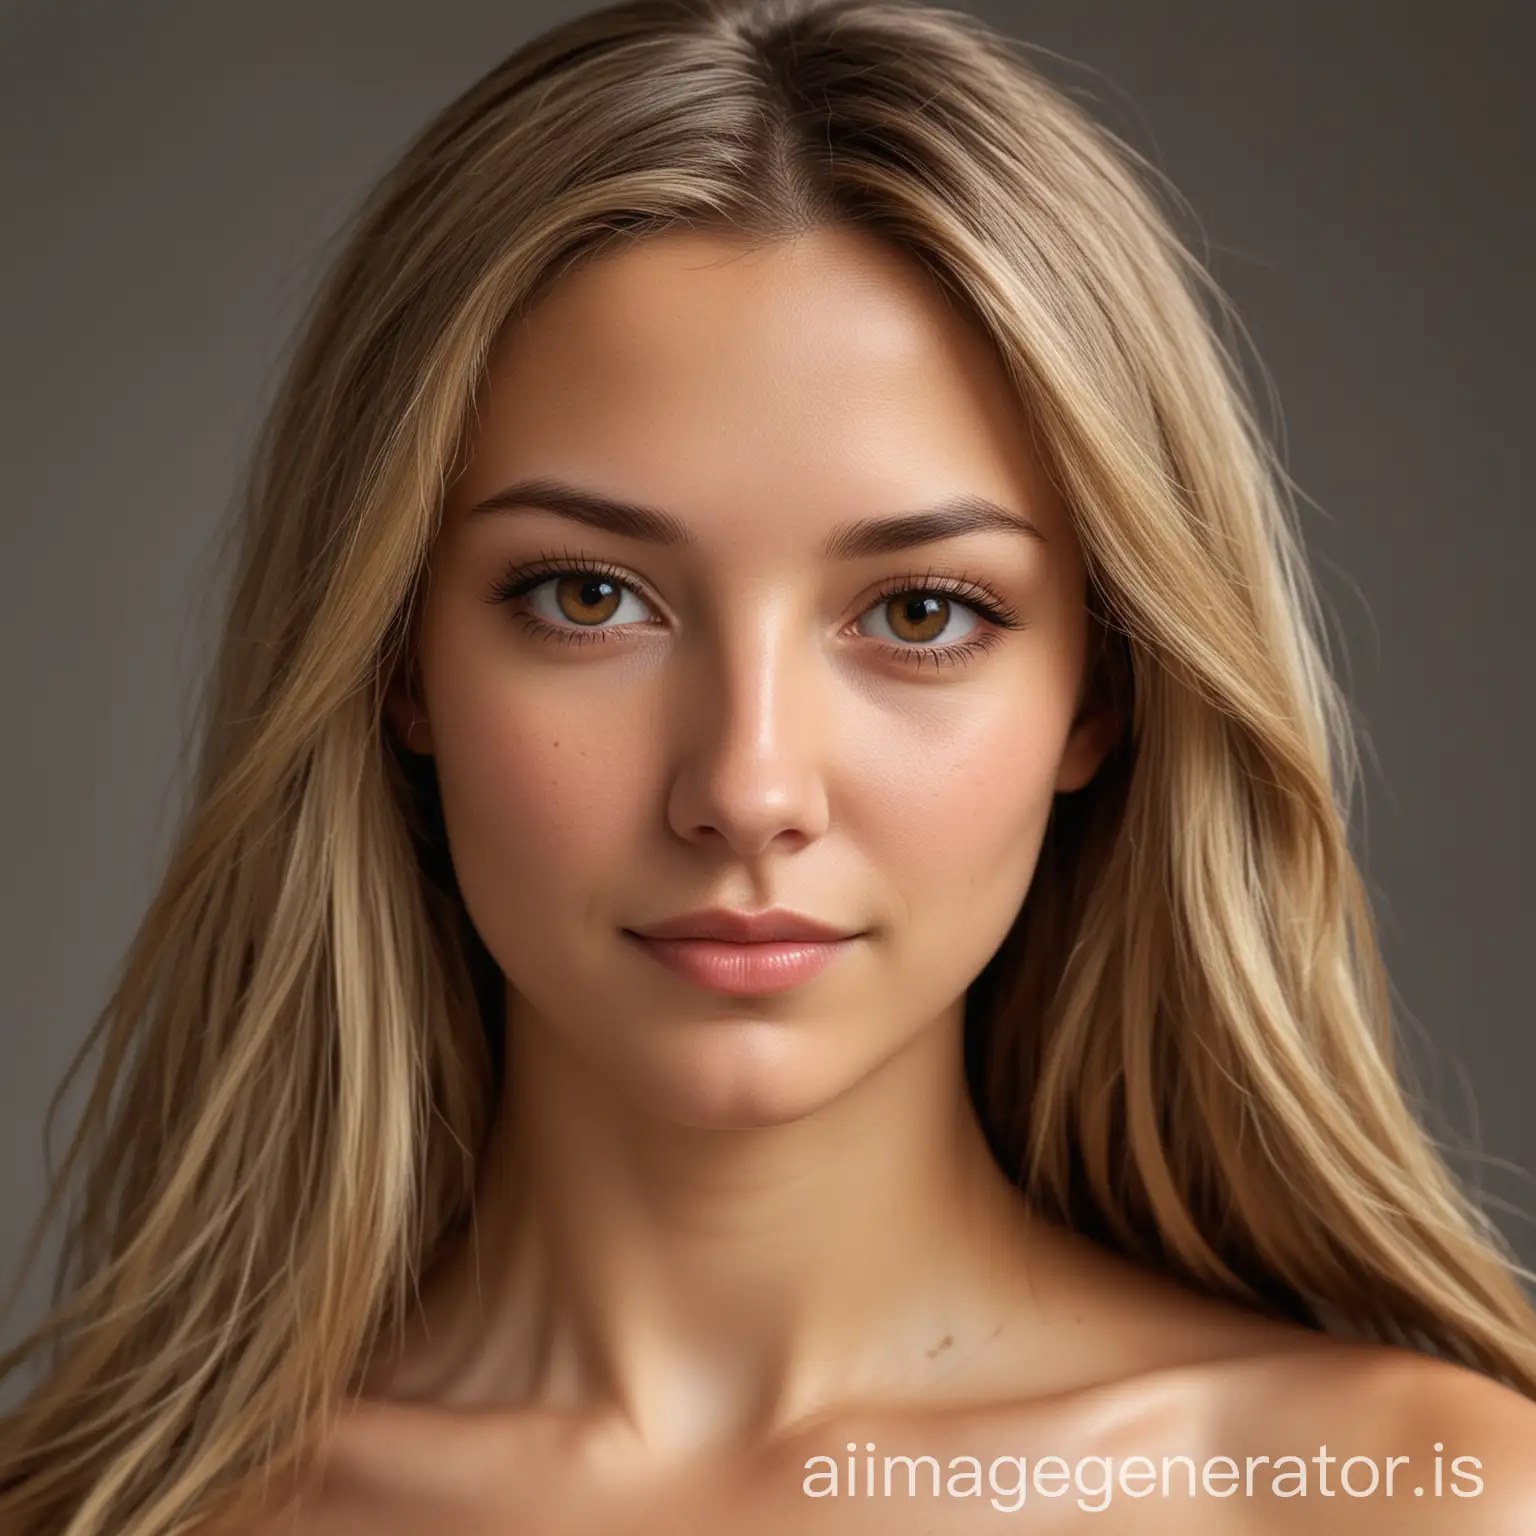 Attractive-Woman-with-Long-Brown-Blond-Hair-and-Brown-Eyes